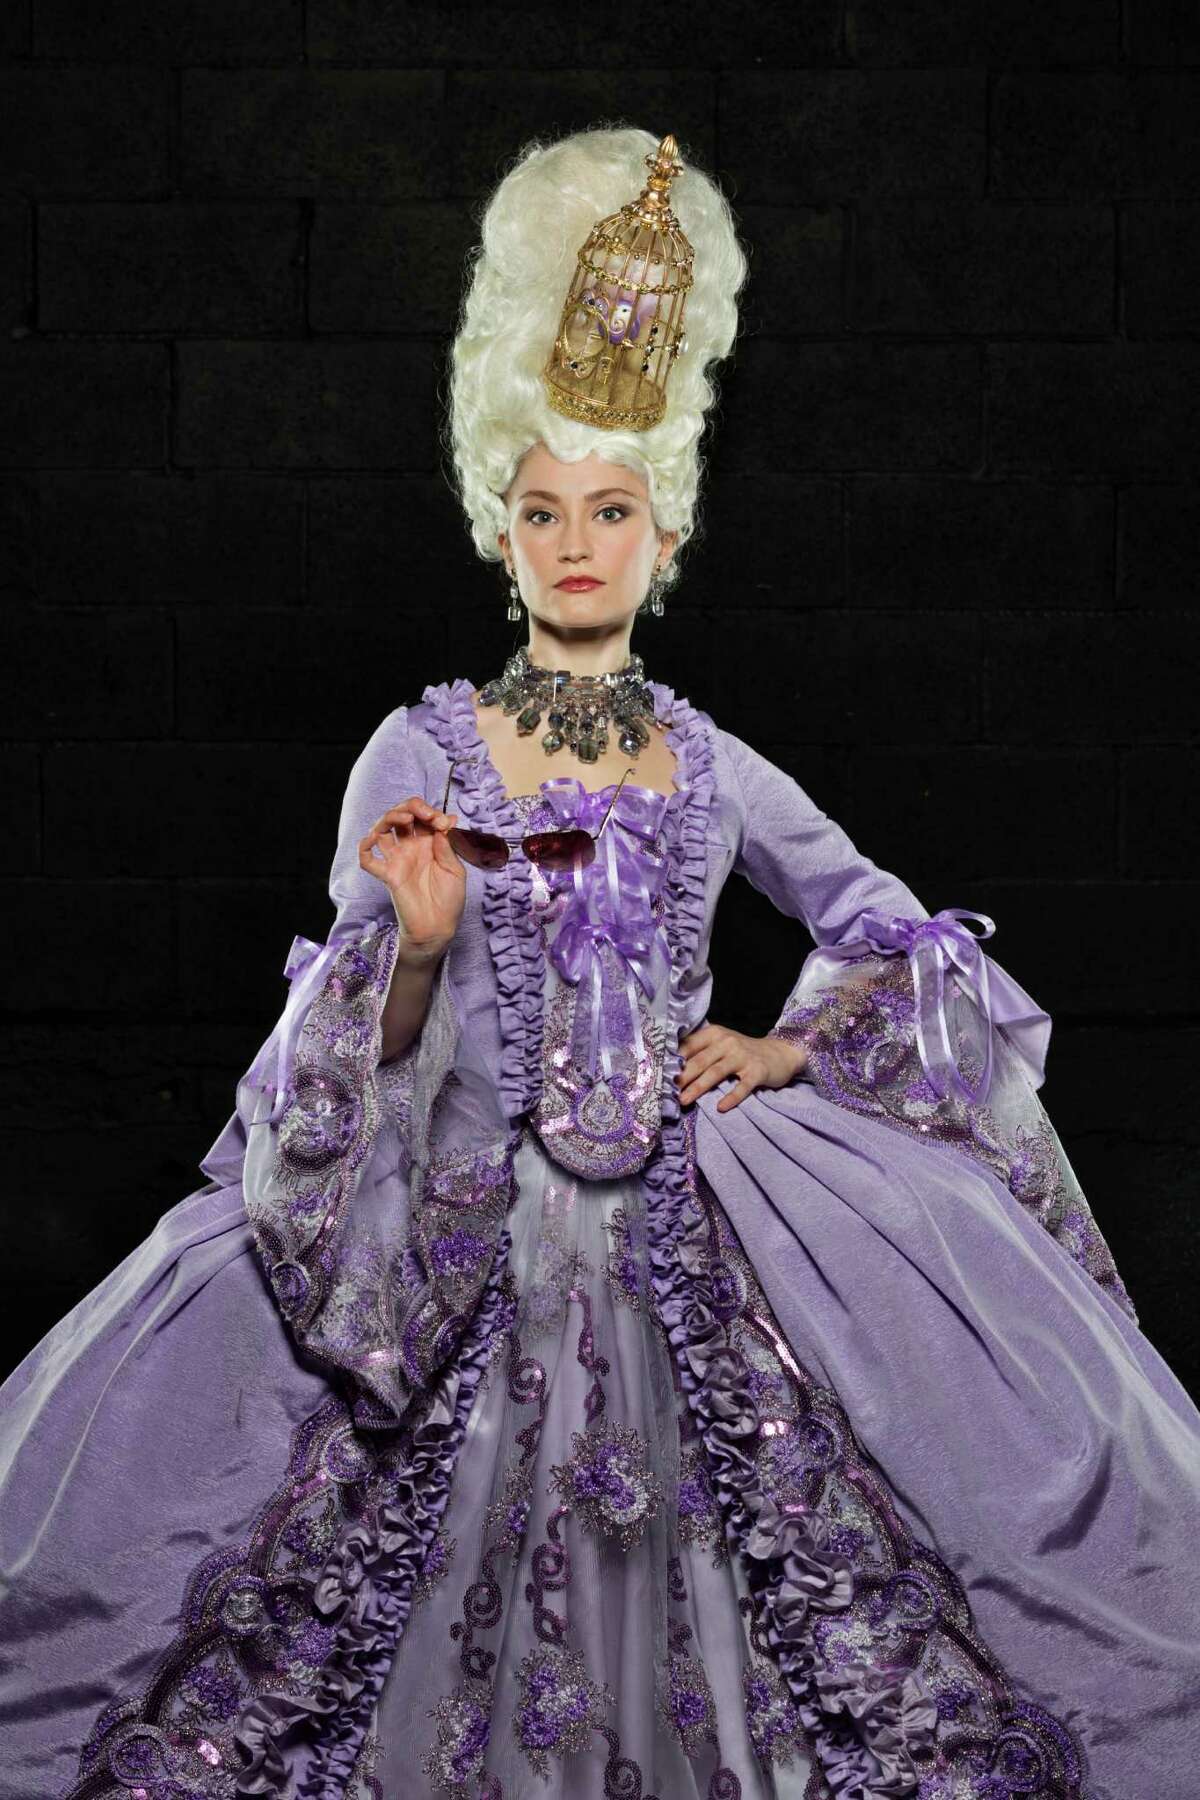 Emily Neves stars in the title role of "Marie Antoinette" at Stages Repertory Theatre